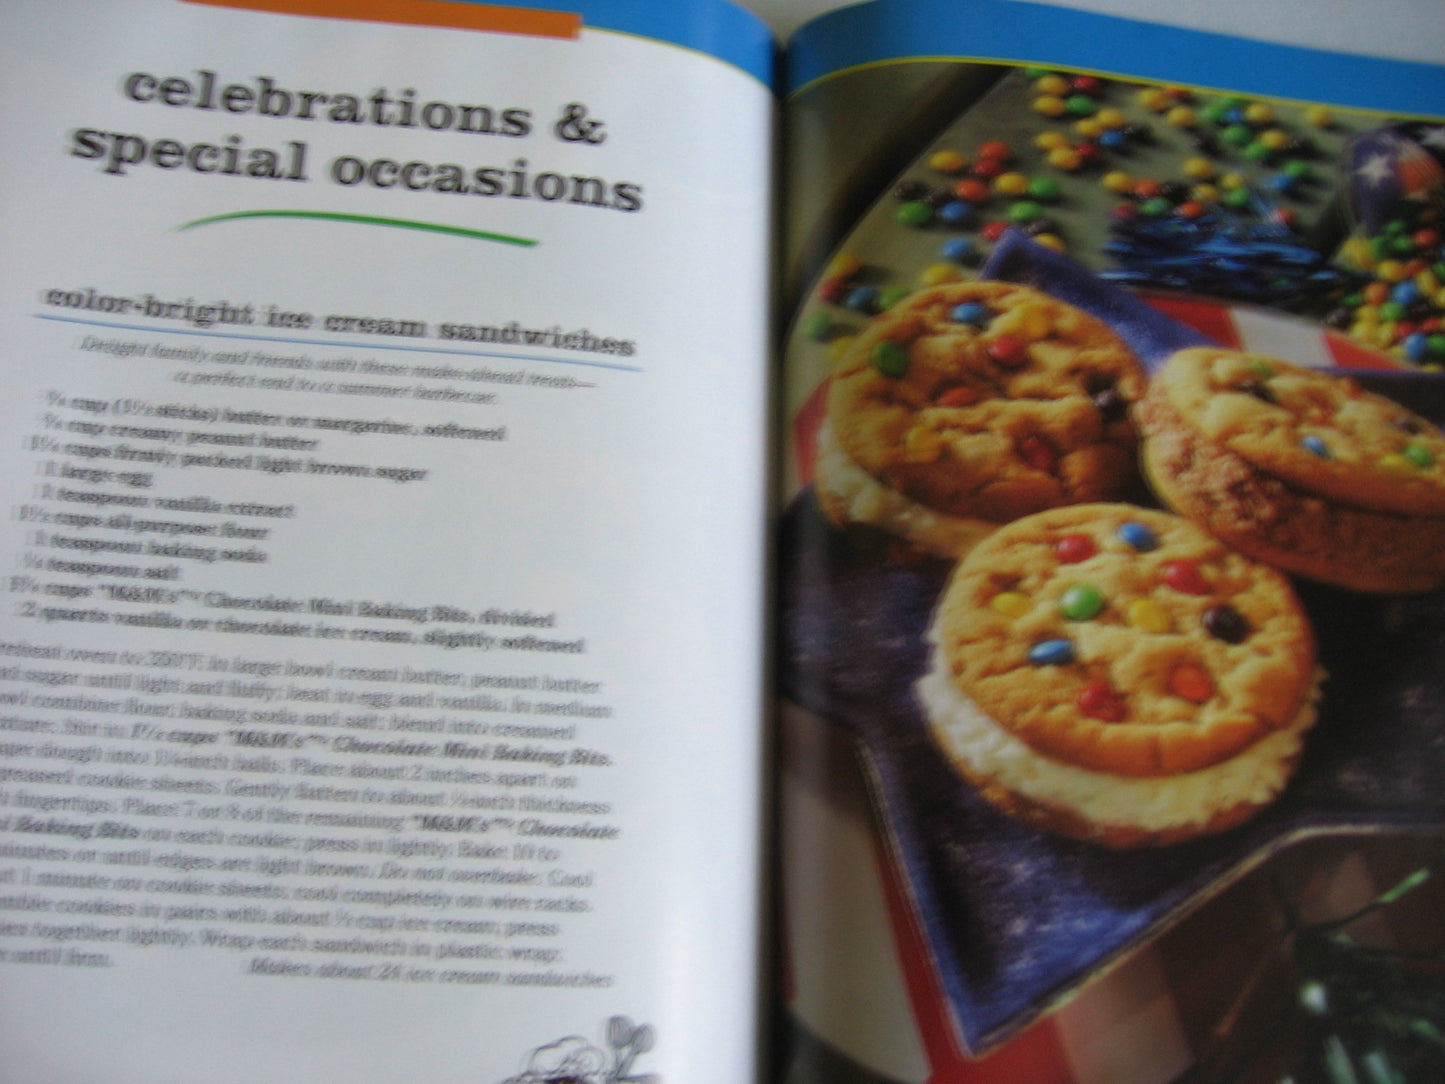 Brighter Baking with M&M's Brand Chocolate Mini Baking Bits Publications International and Mars, Incorporated